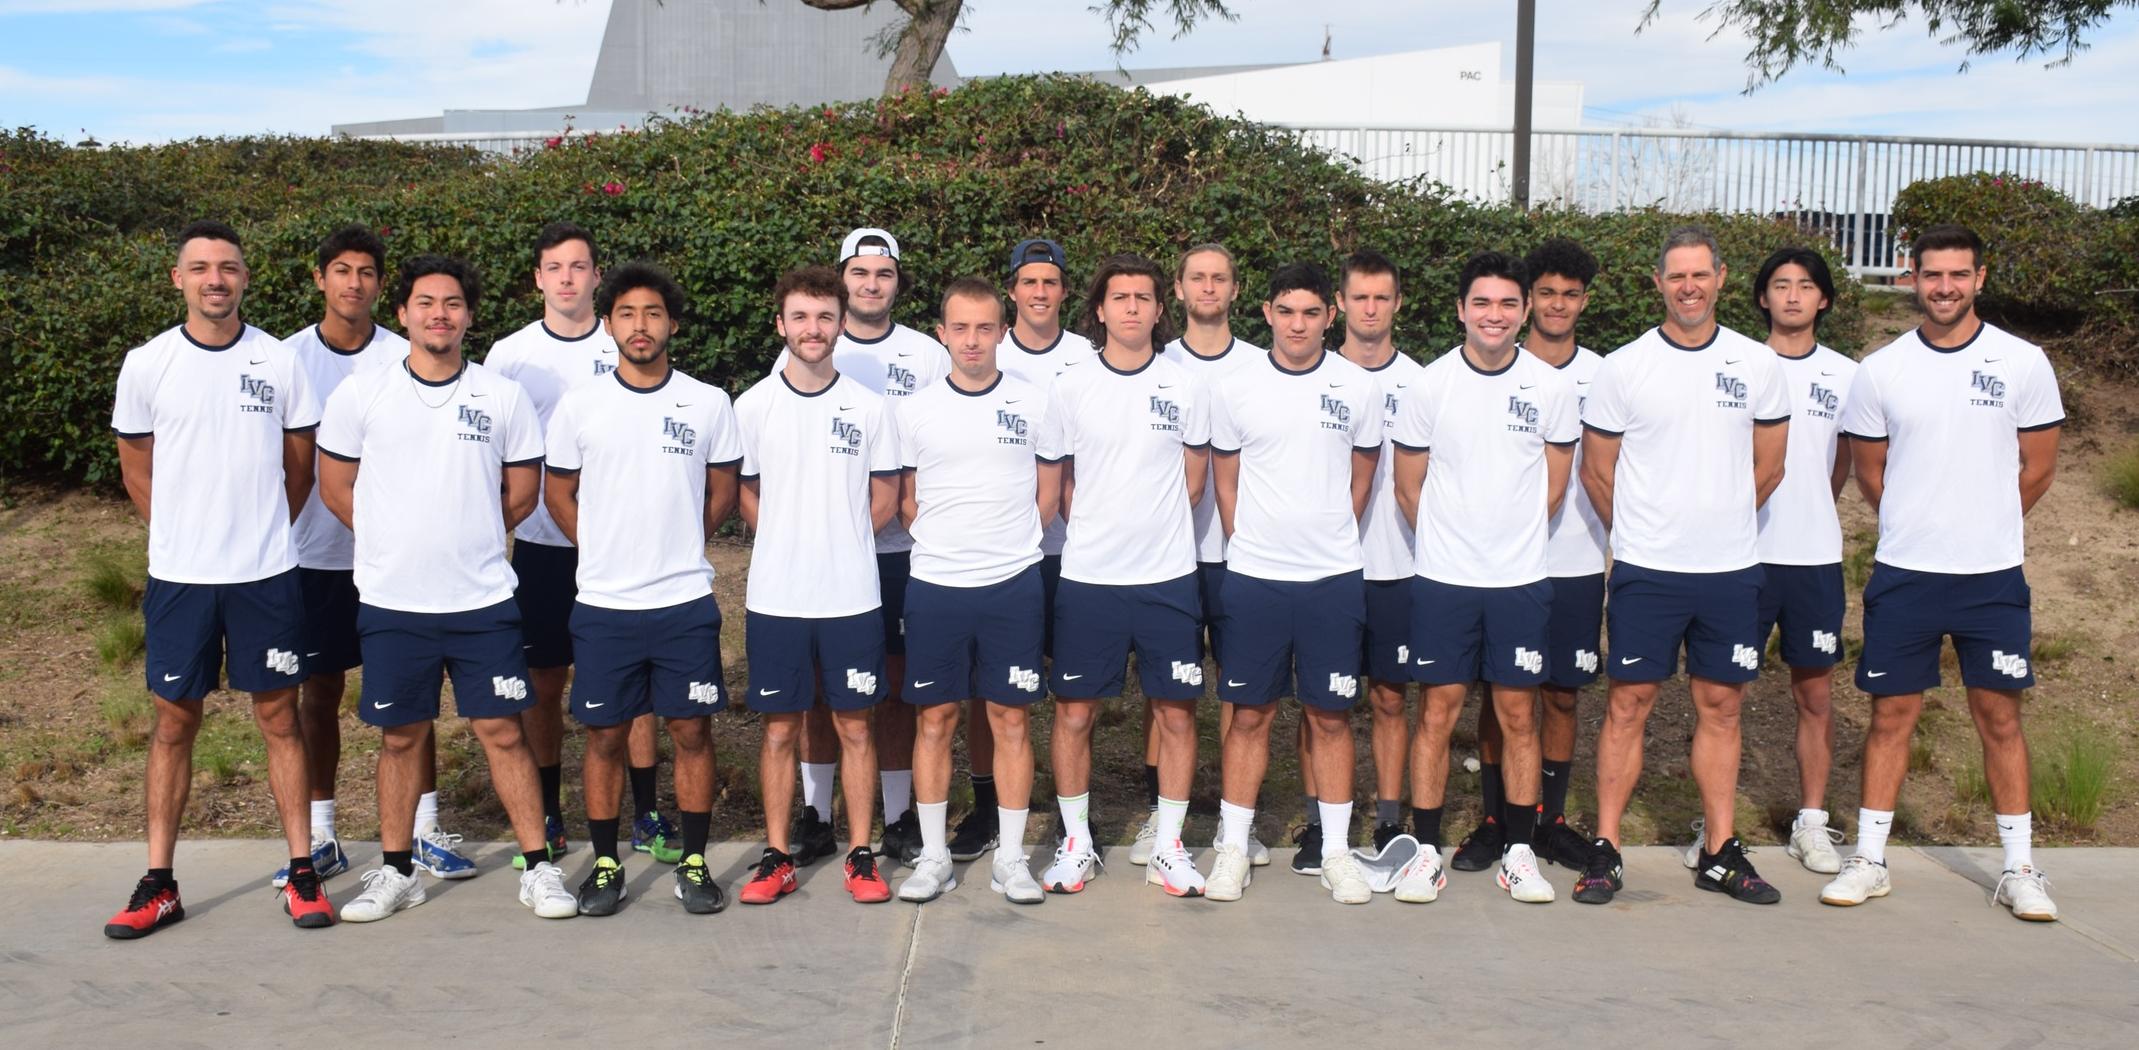 More accolades for the Irvine Valley men's tennis team